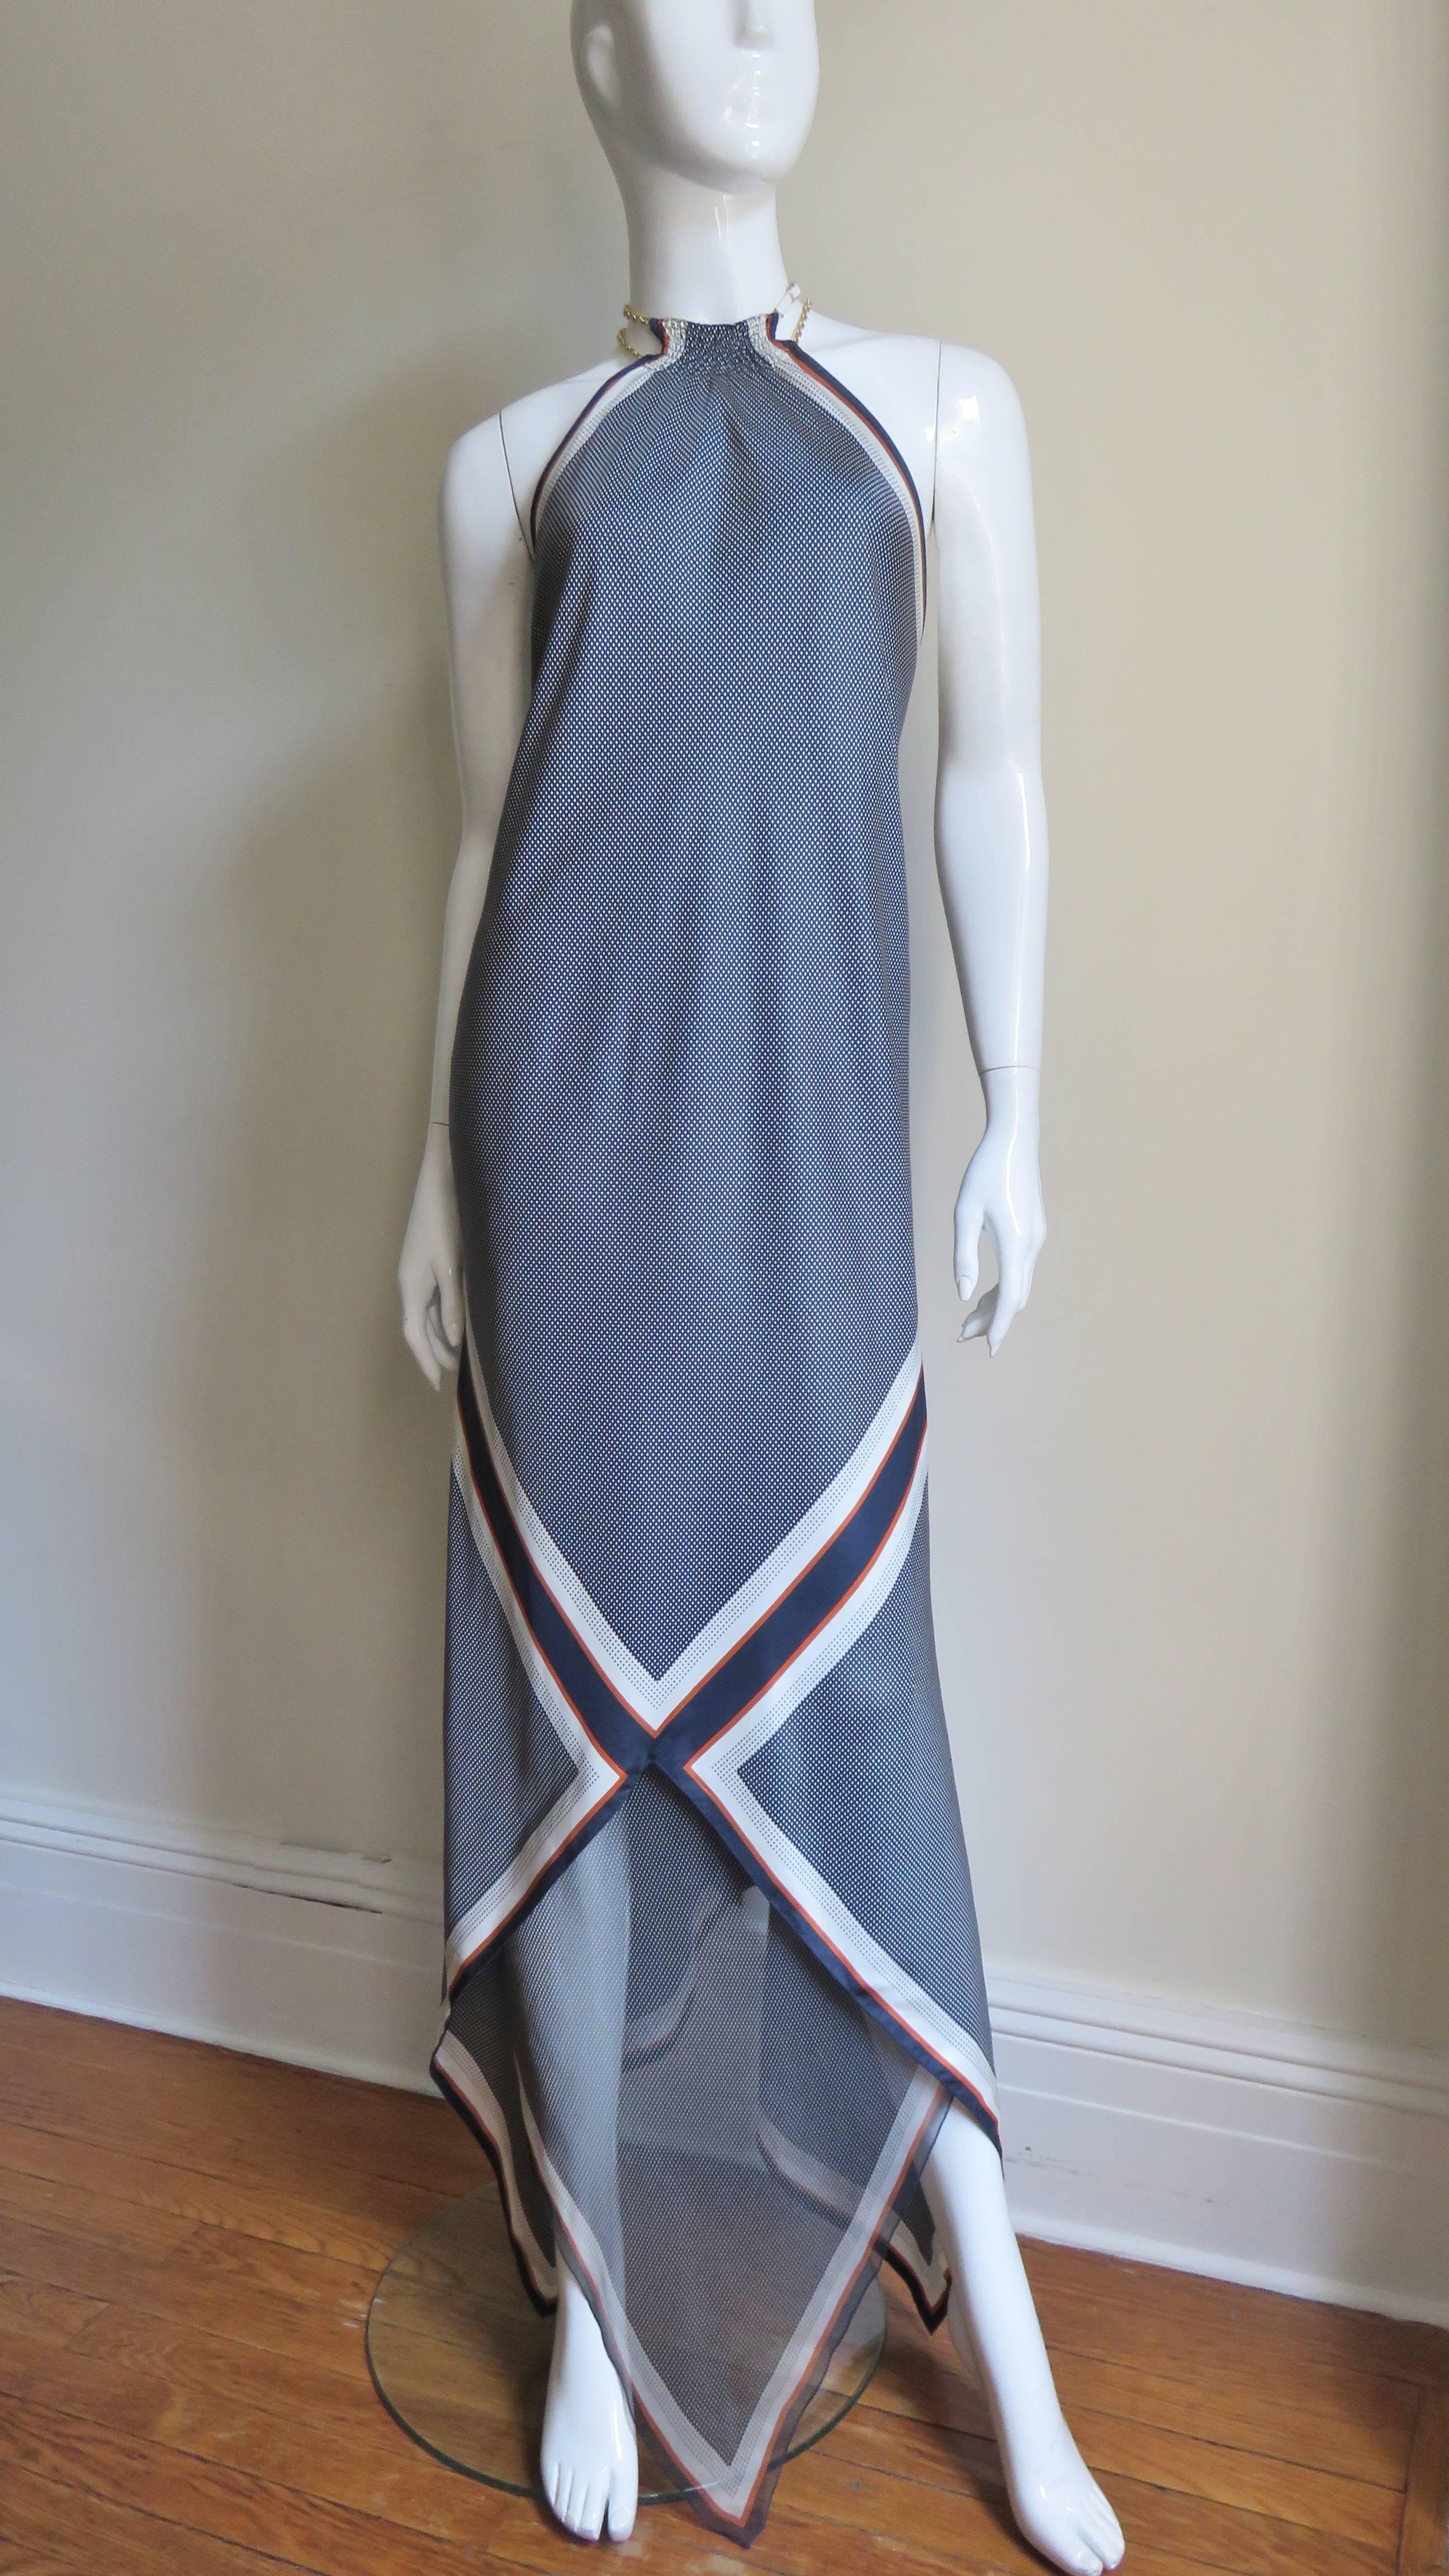 A fabulous silk dress in navy with white dots trimmed in white and rust stripes.  The dress drapes beautifully on the body and has a ruched halter with delicate chains, small white leather straps and buckles closing at the neck.  A sheer panel of